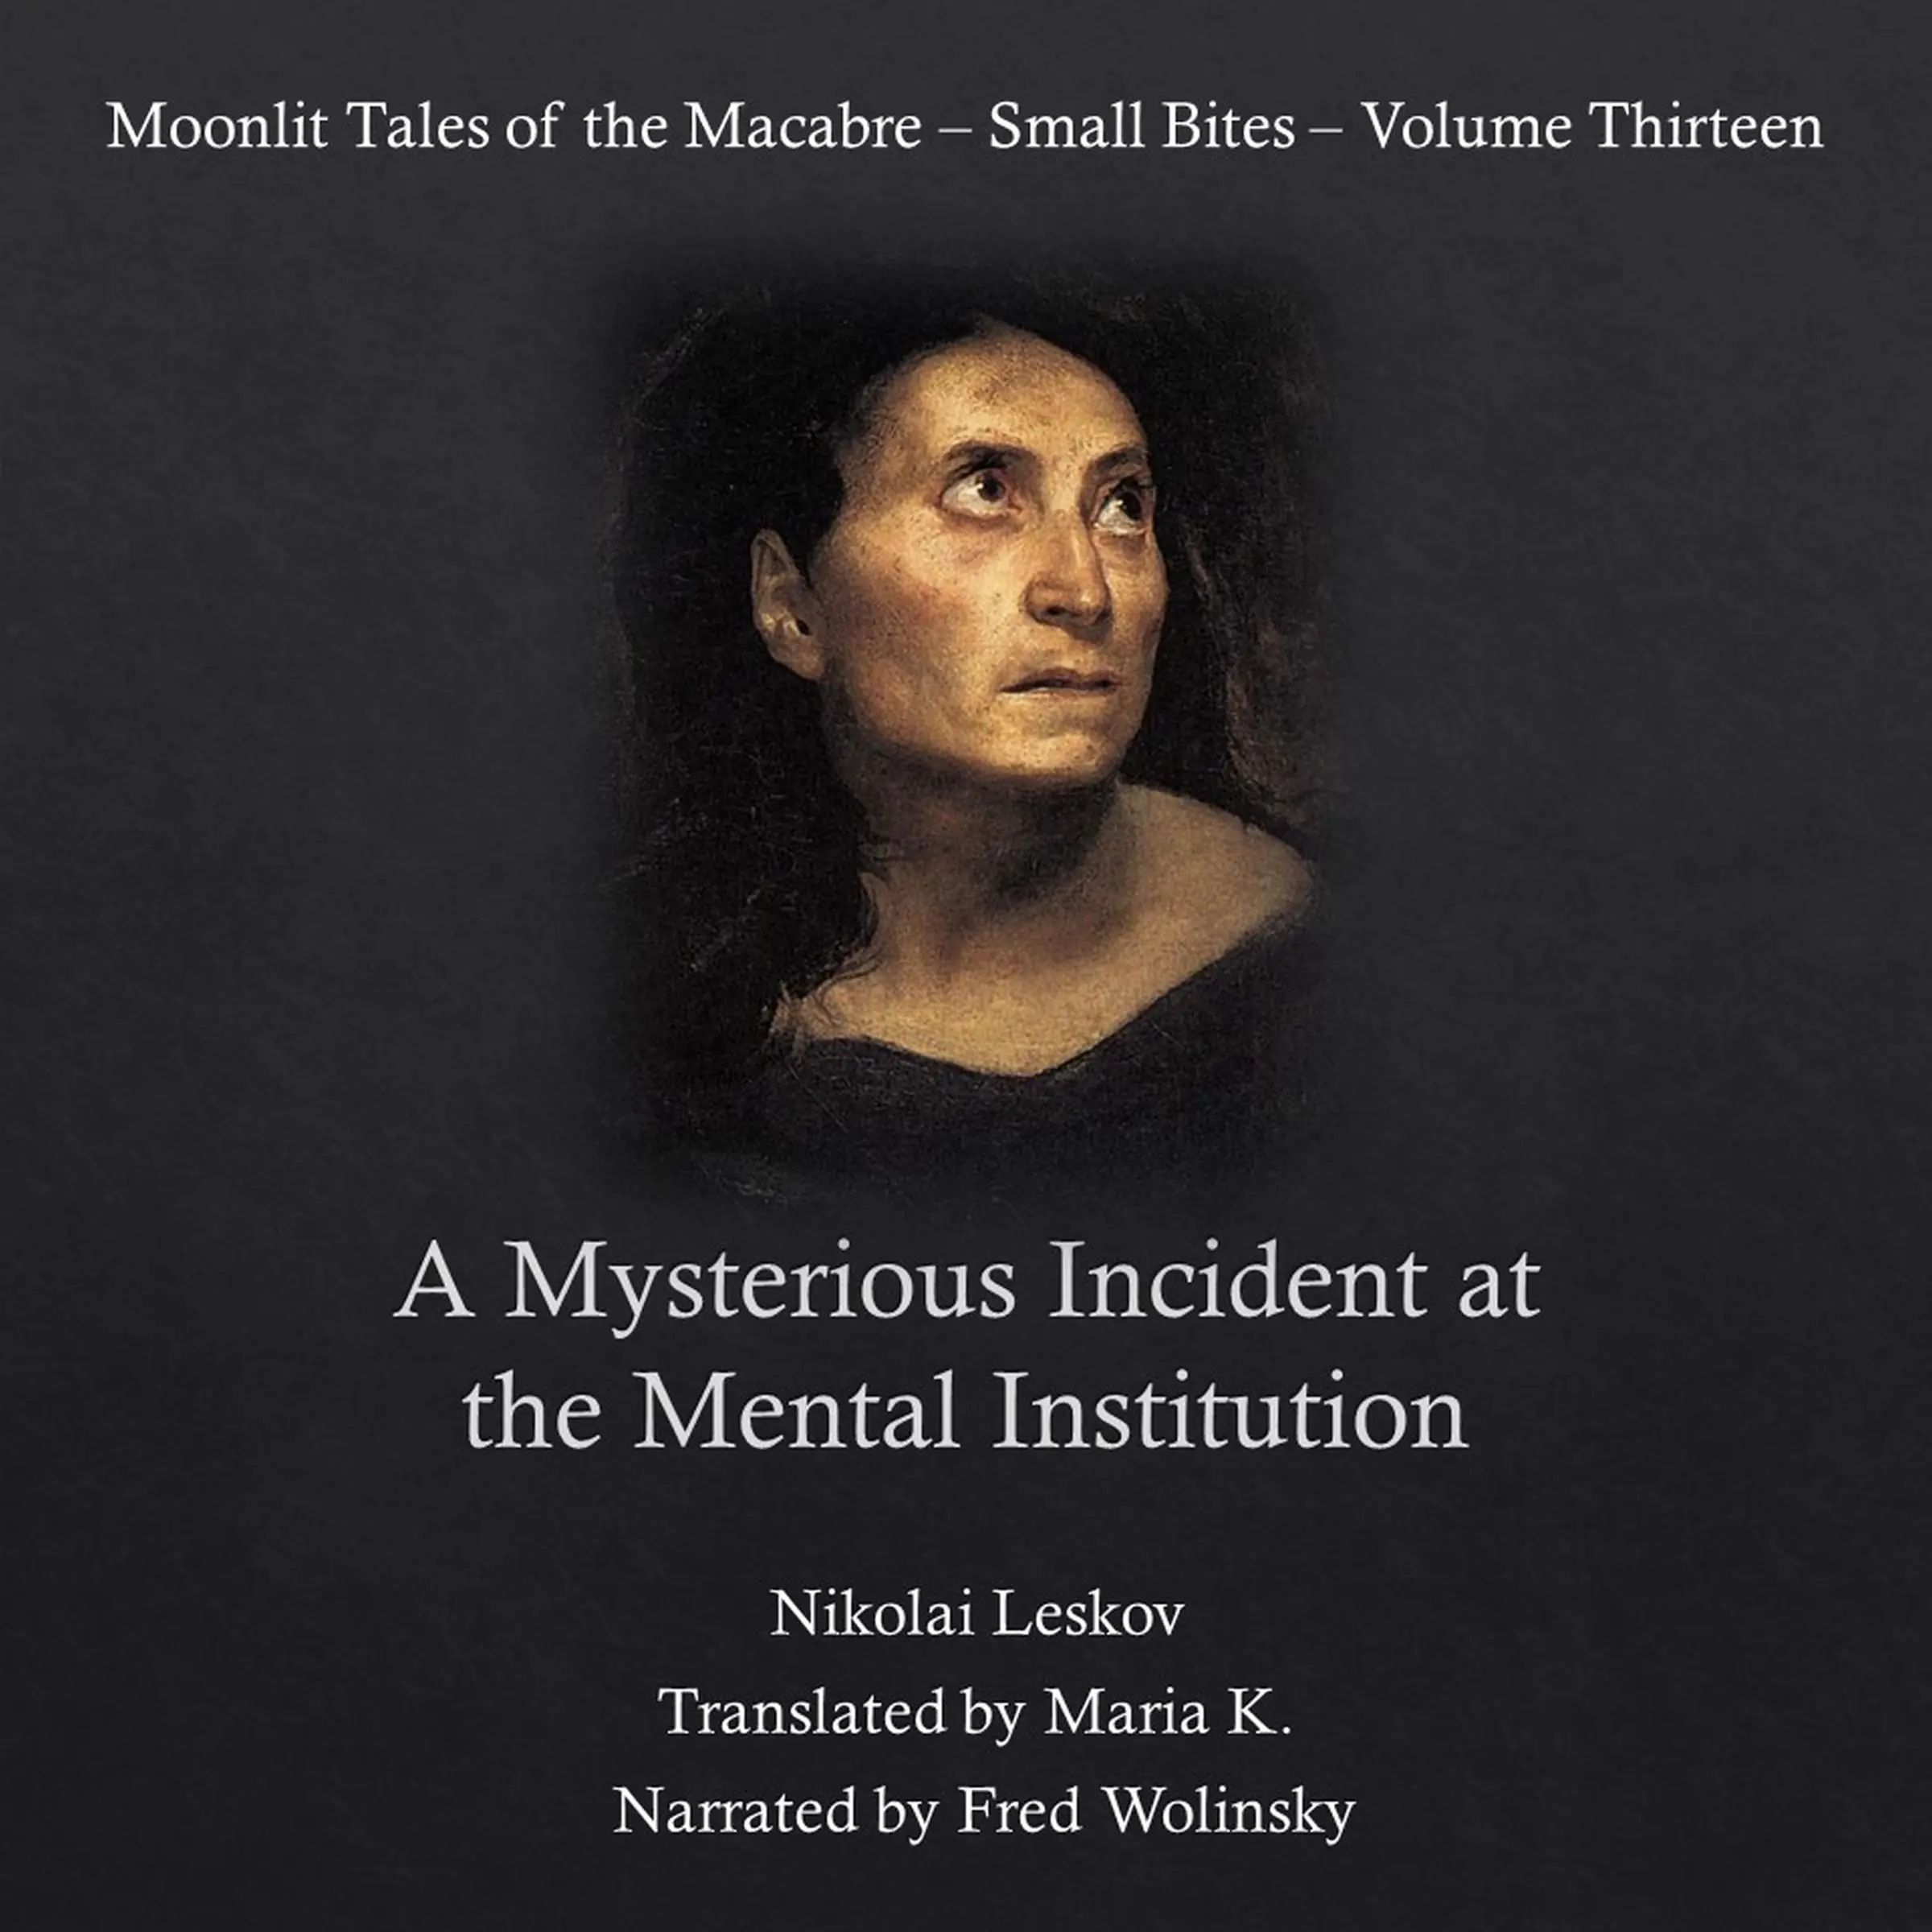 A Mysterious Incident at the Mental Institution (Moonlit Tales of the Macabre - Small Bites Book 13) by Nikolai Leskov Audiobook